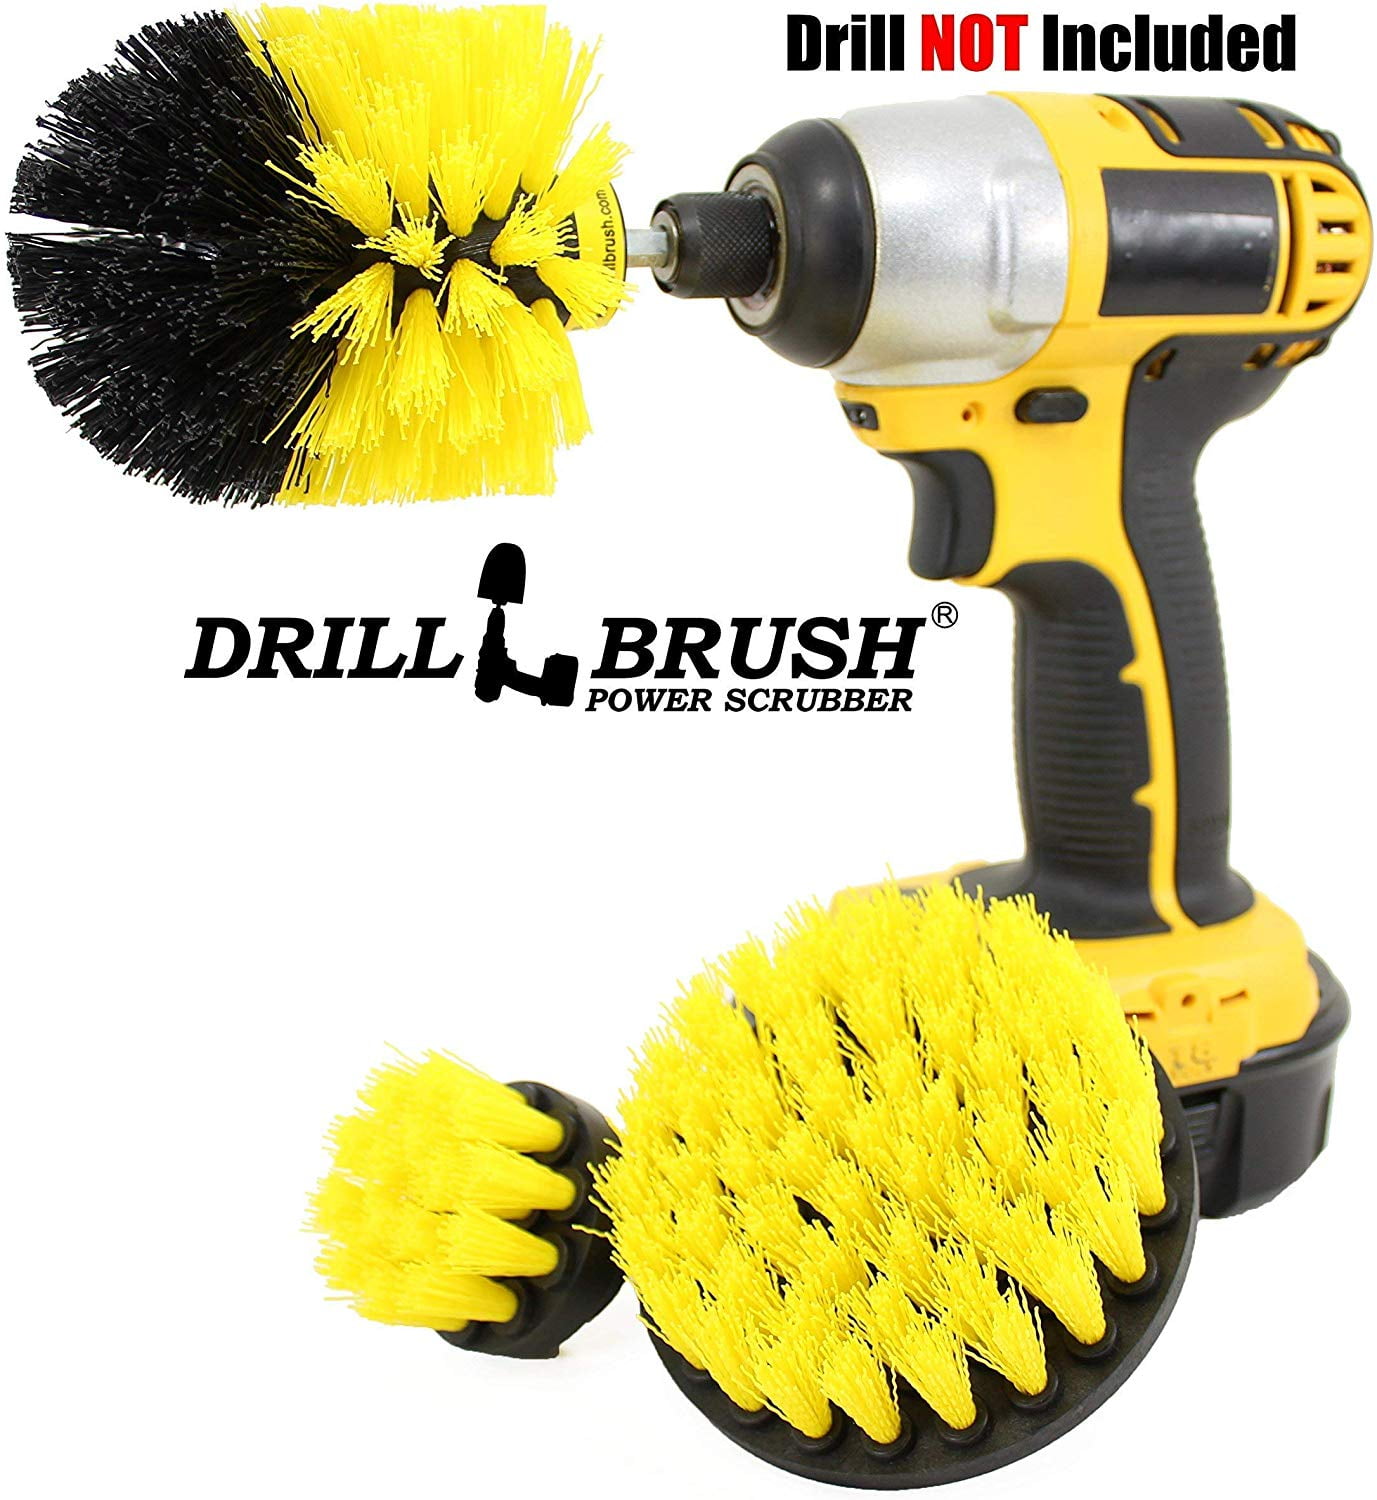 Drill Brush Set Power Scrubber Carpet Tile Grout Cleaning Drill Attachments 